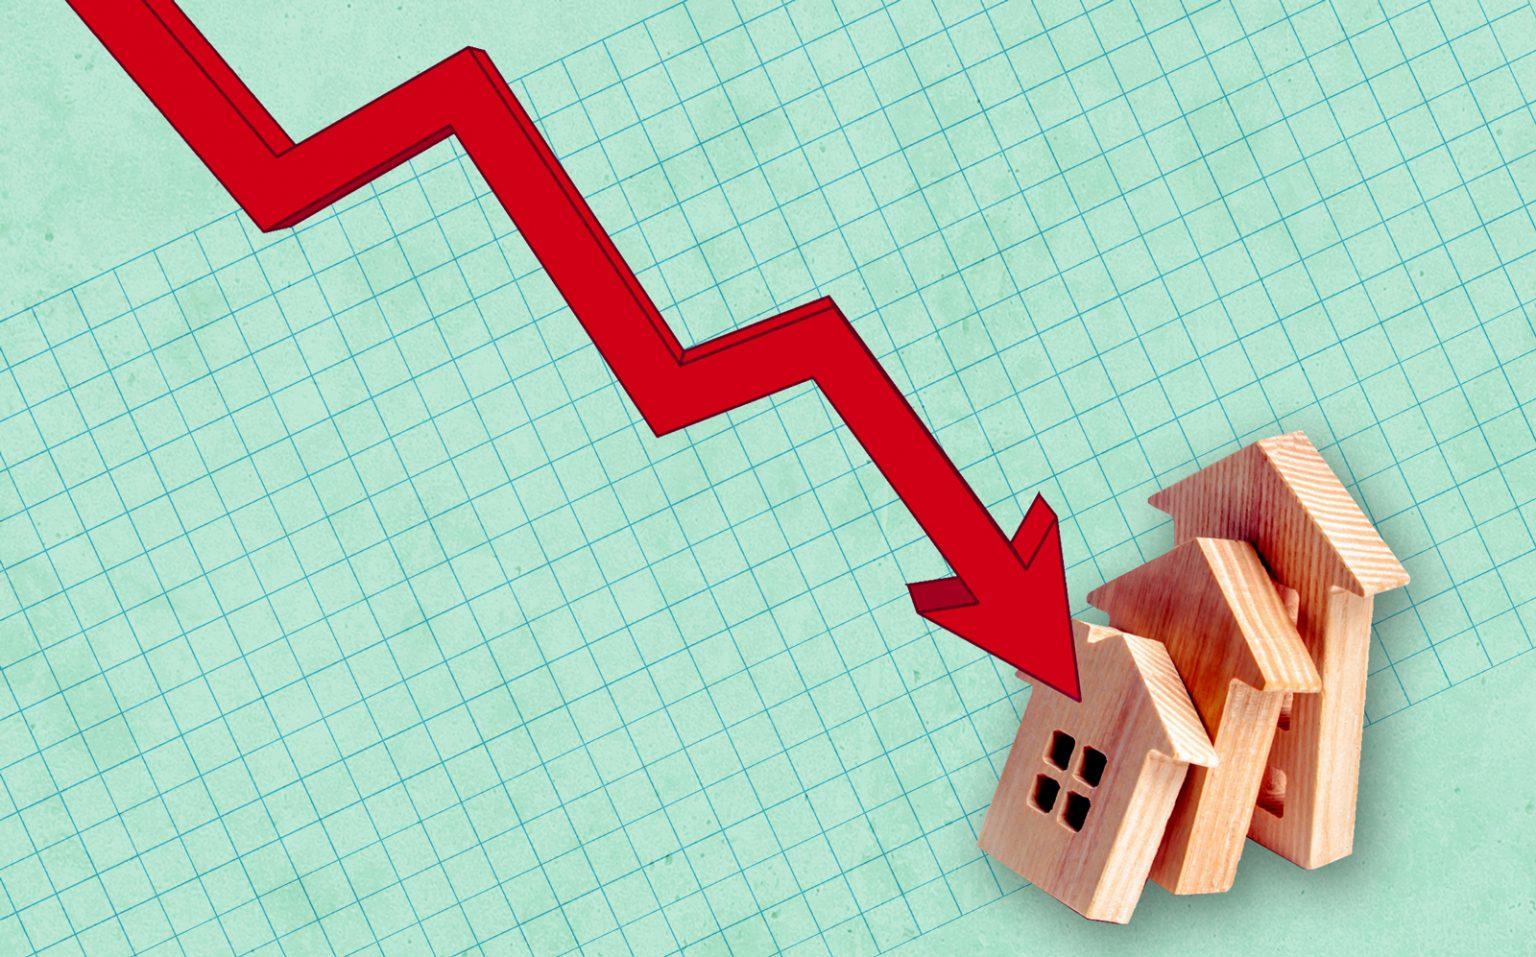 US Housing Supply Hits Low in PostCovid Market